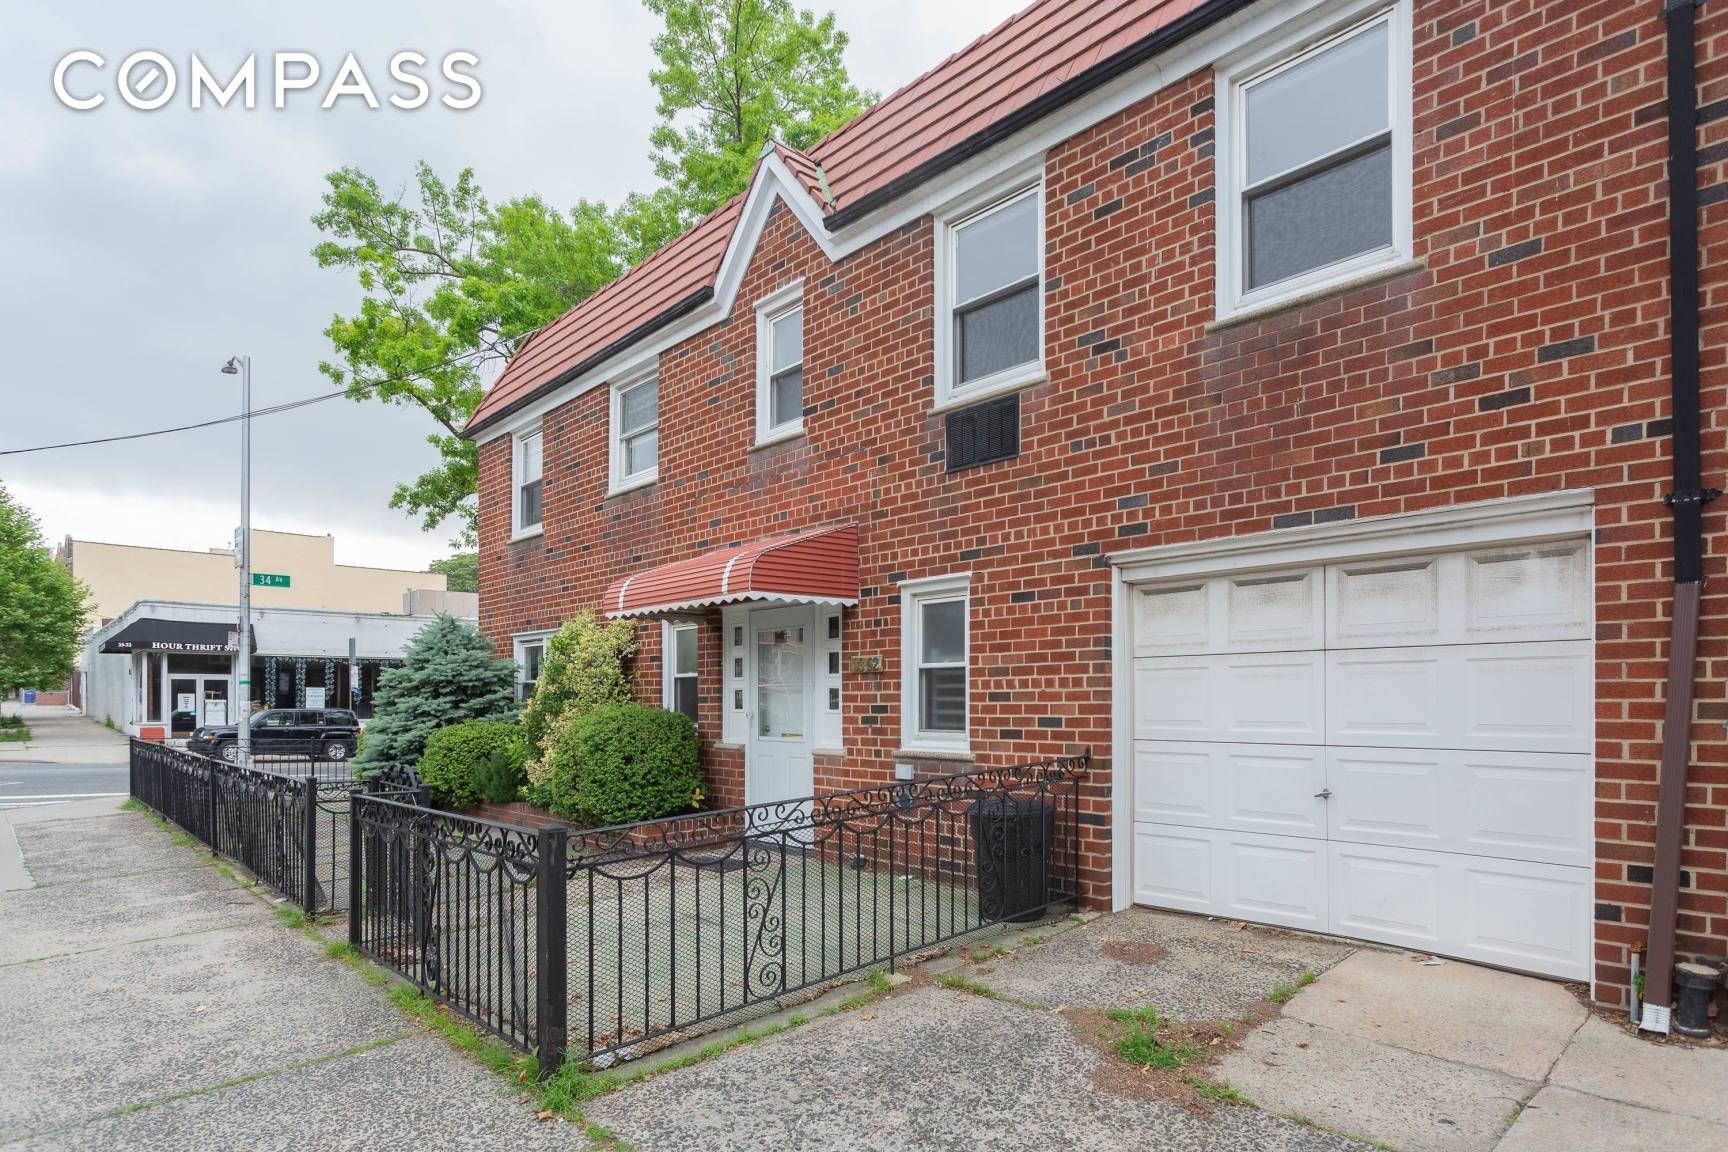 Coveted corner location, 2 family brick house with parking for multiple cars.